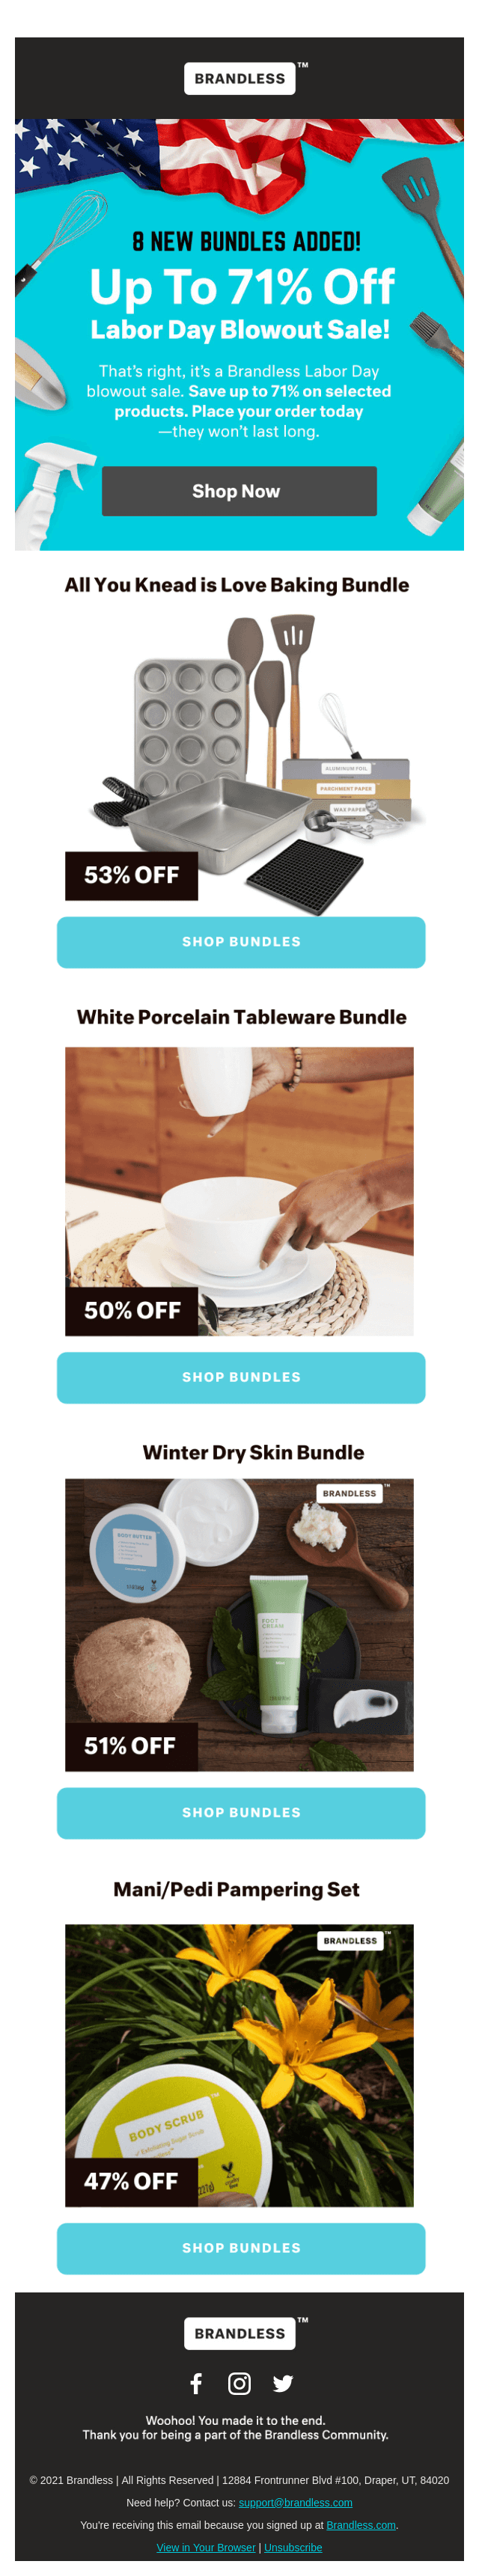 Image shows a marketing email from Brandless